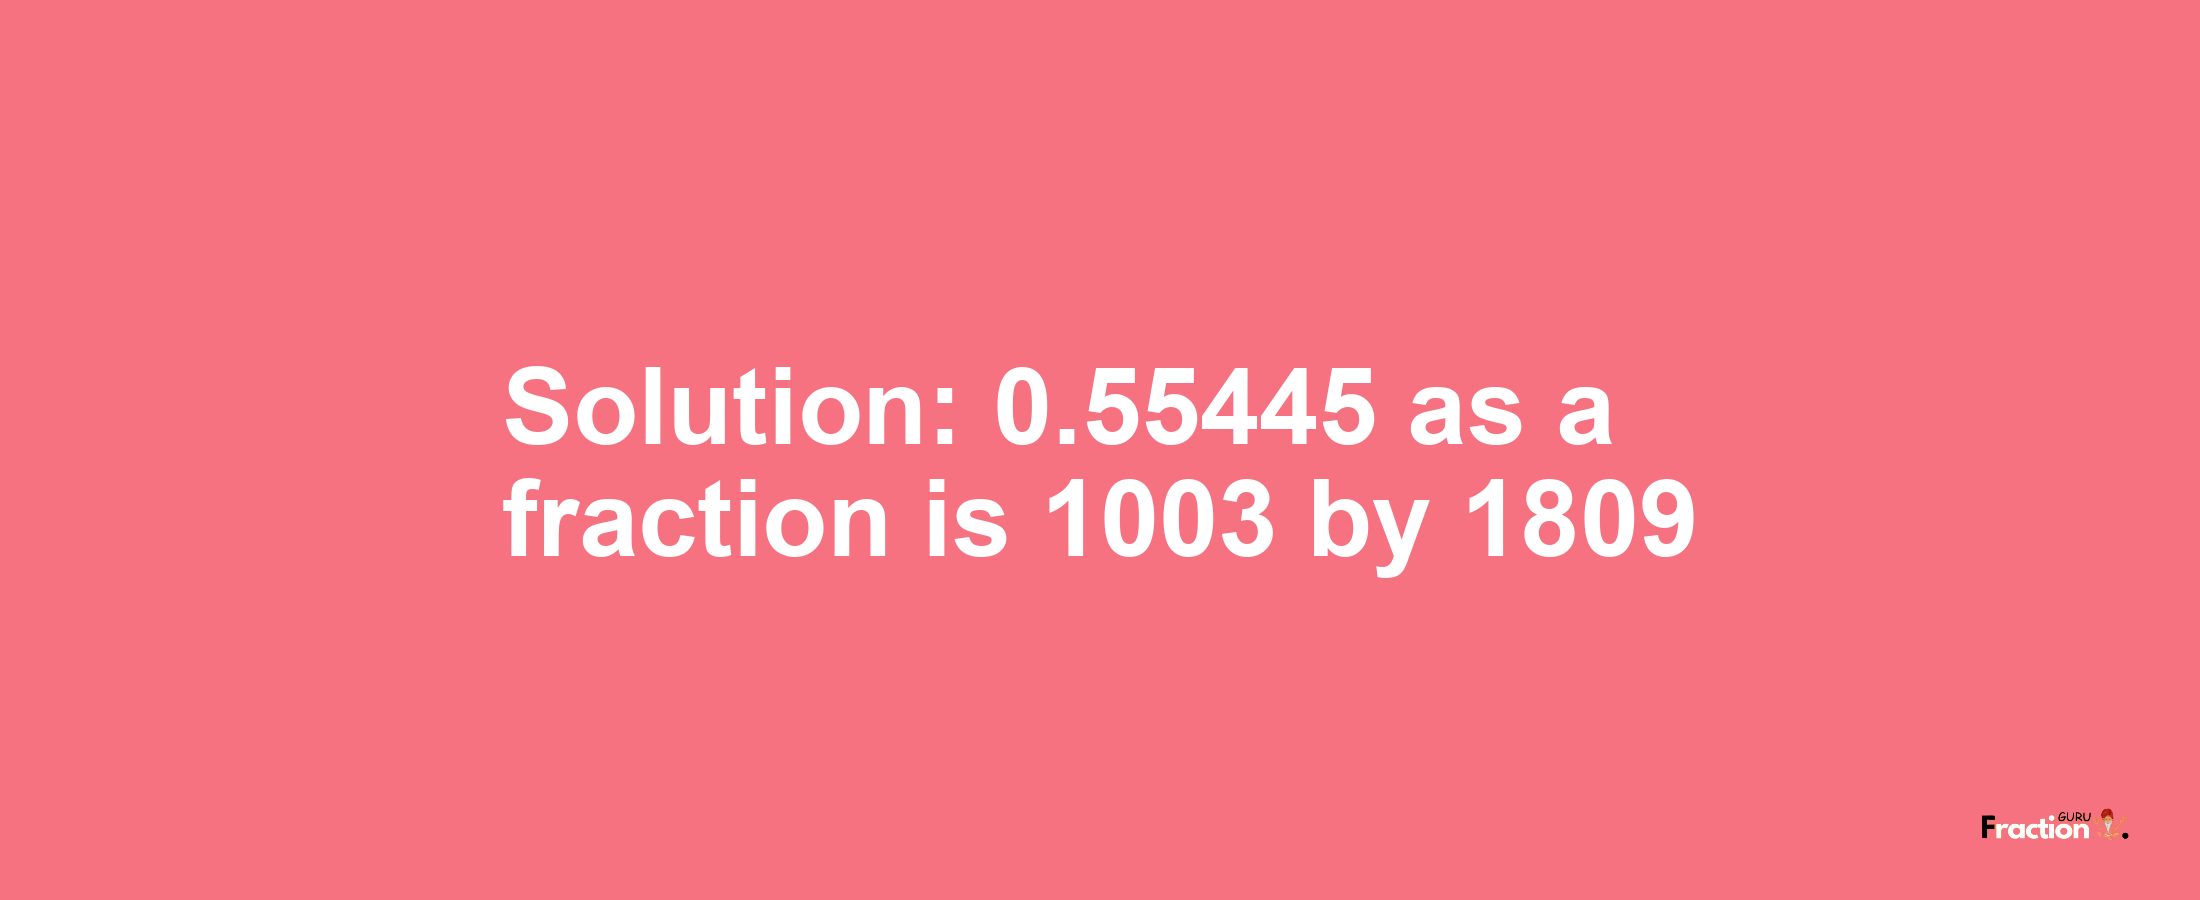 Solution:0.55445 as a fraction is 1003/1809